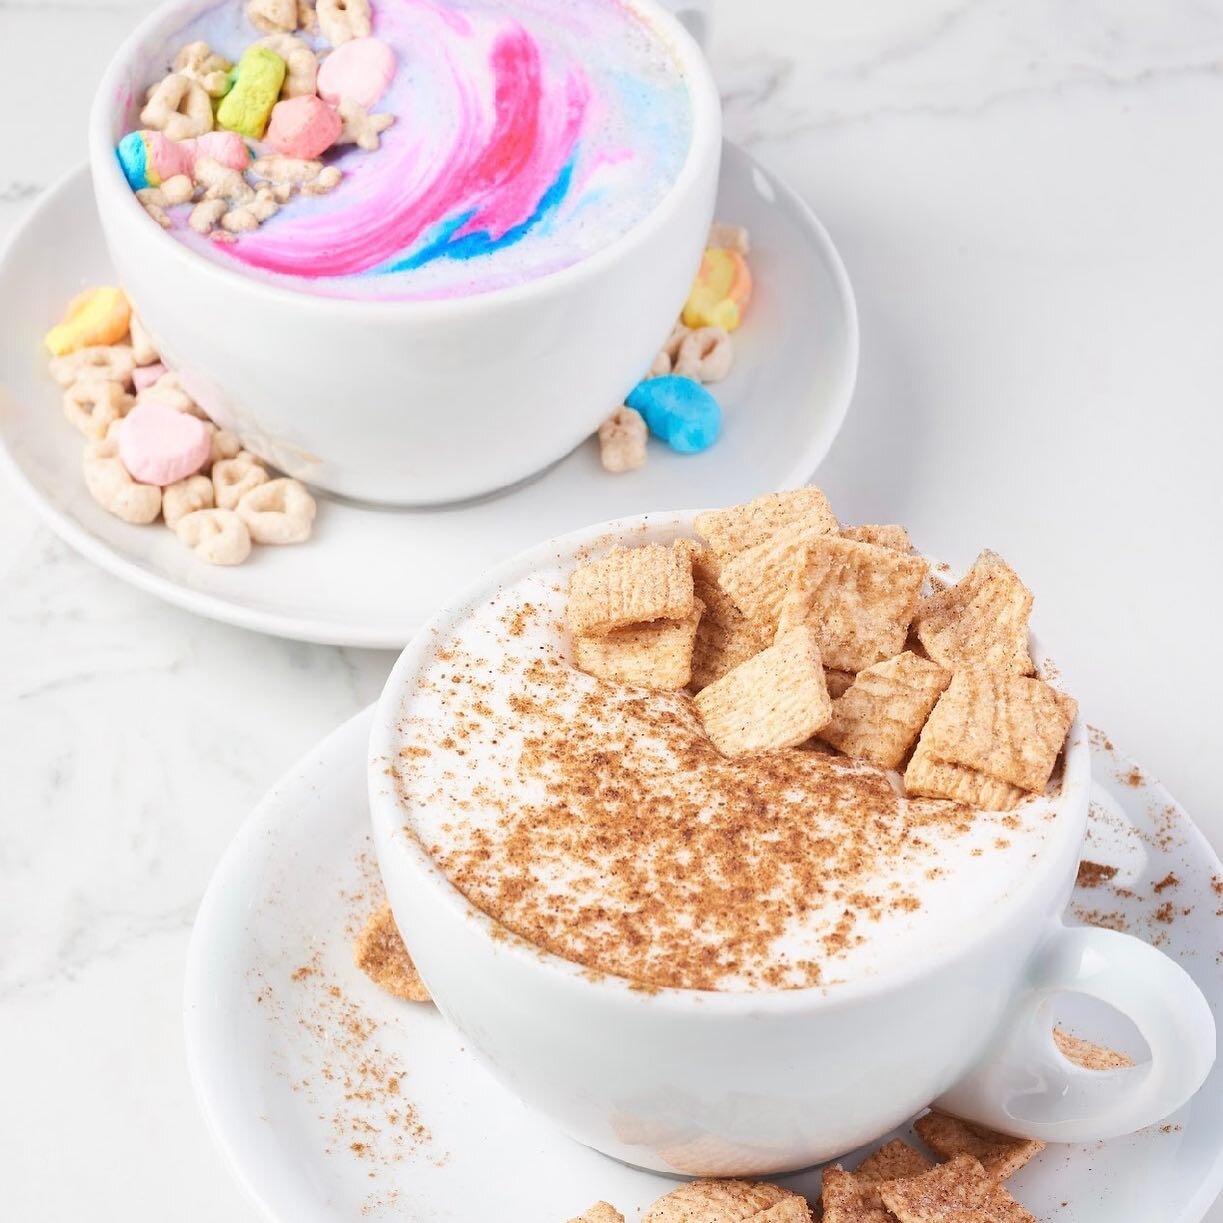 Why settle for one, when you can have variety? 🤭 unicorn latte + cinnalicious = his and hers! 

You never know how things pan out the morning after&hellip; 🤷🏻&zwj;♀️🫣

&mdash;&mdash;&mdash;&mdash;&mdash;&mdash;&mdash;&mdash;&mdash;&mdash;&mdash;&